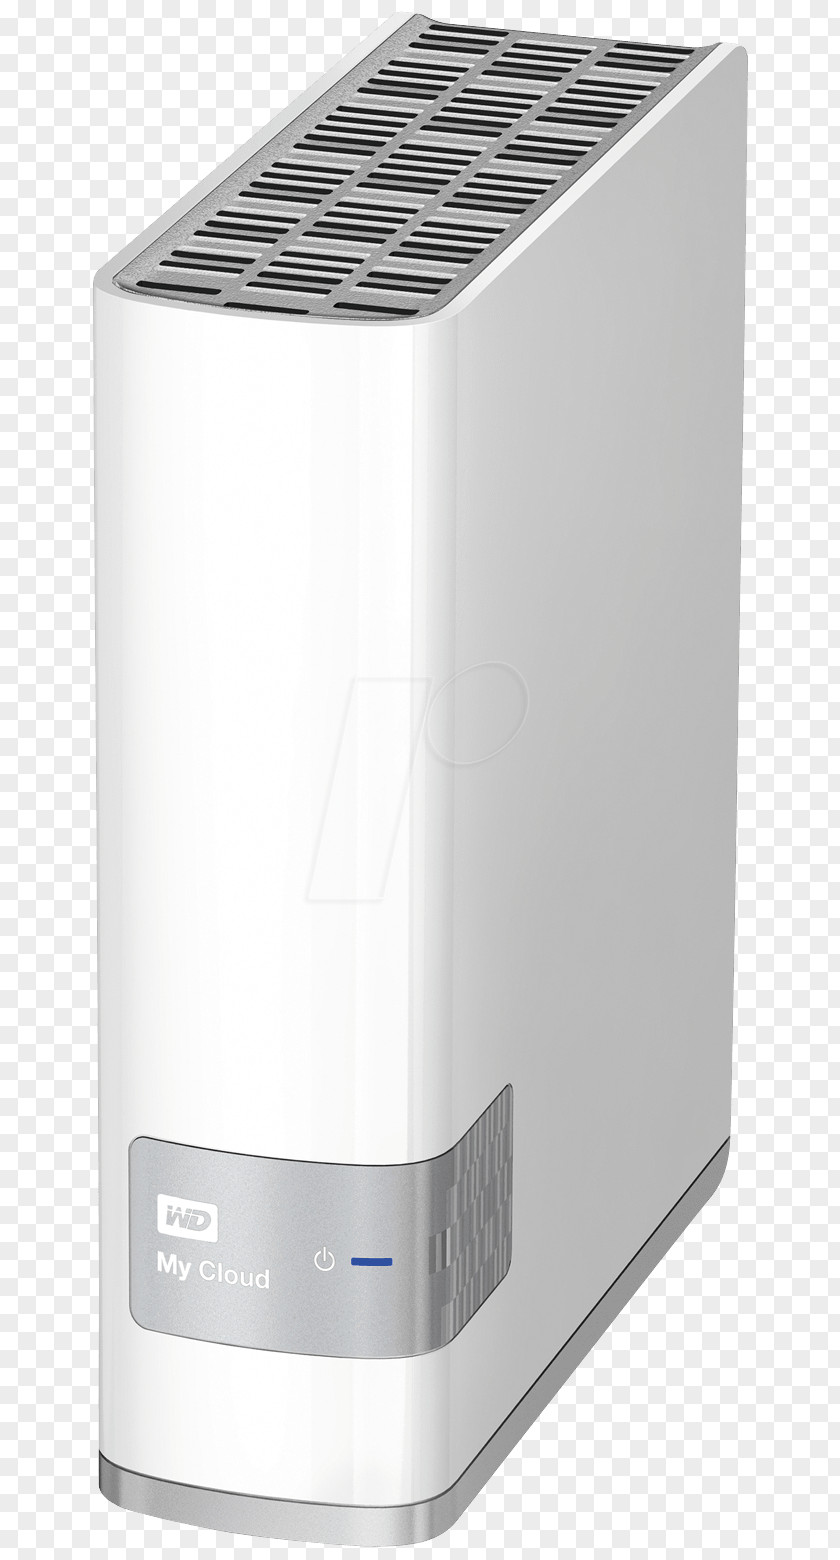 WD My Cloud Hard Drives Western Digital Network-attached Storage PNG